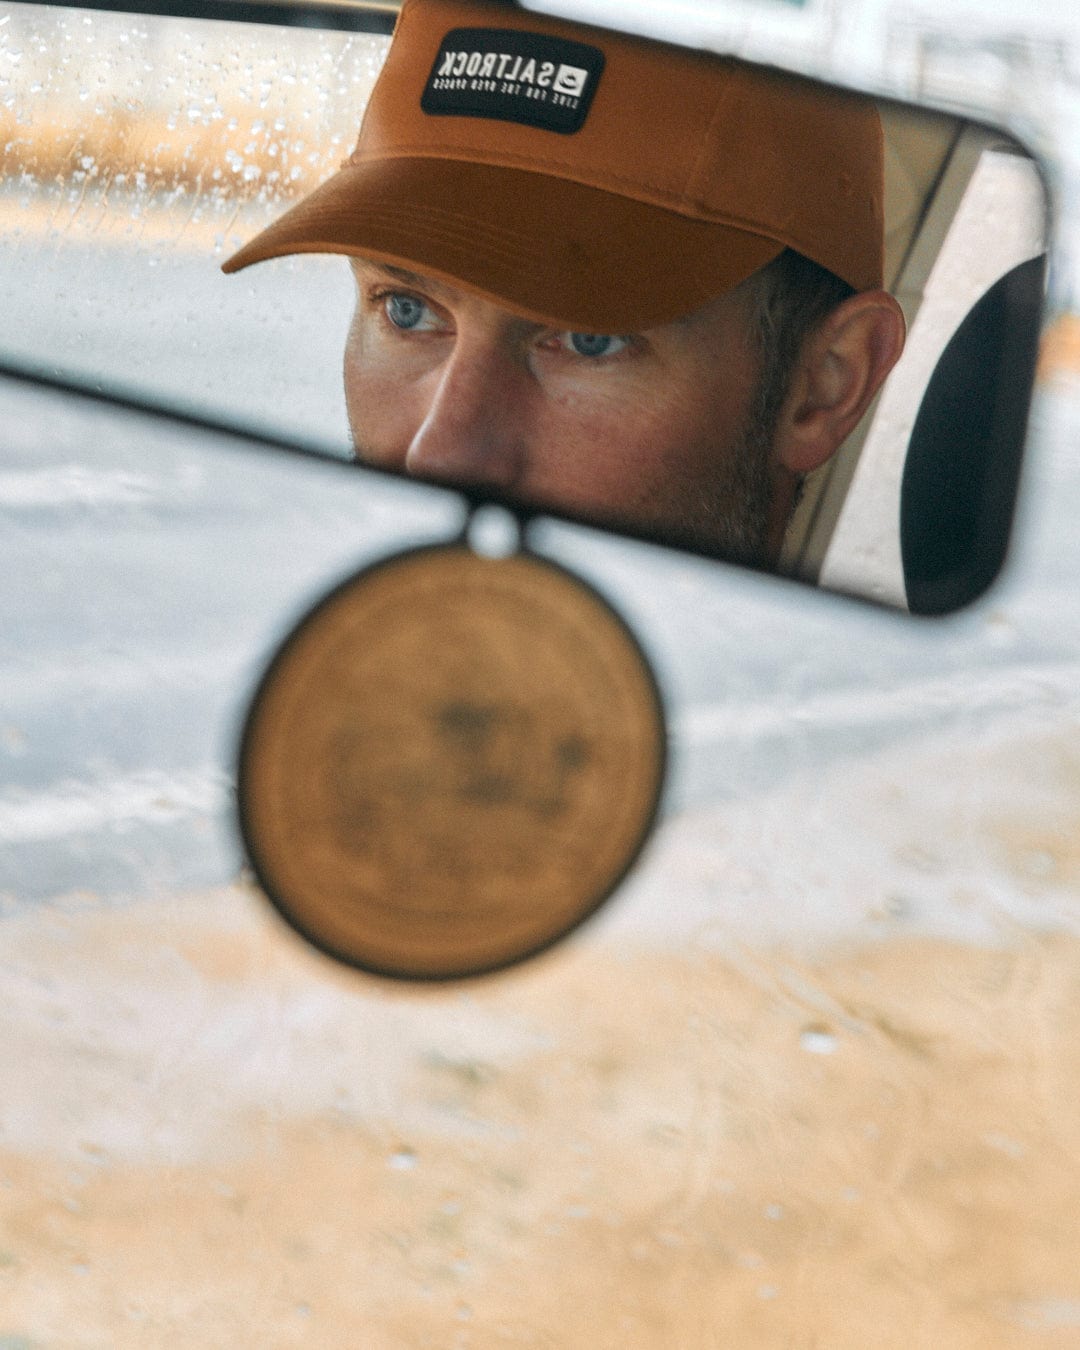 Man with blue eyes seen in car’s rear-view mirror, wearing a brown Saltrock Boardwalk - 5 Panel Cap, with raindrops visible on the window.